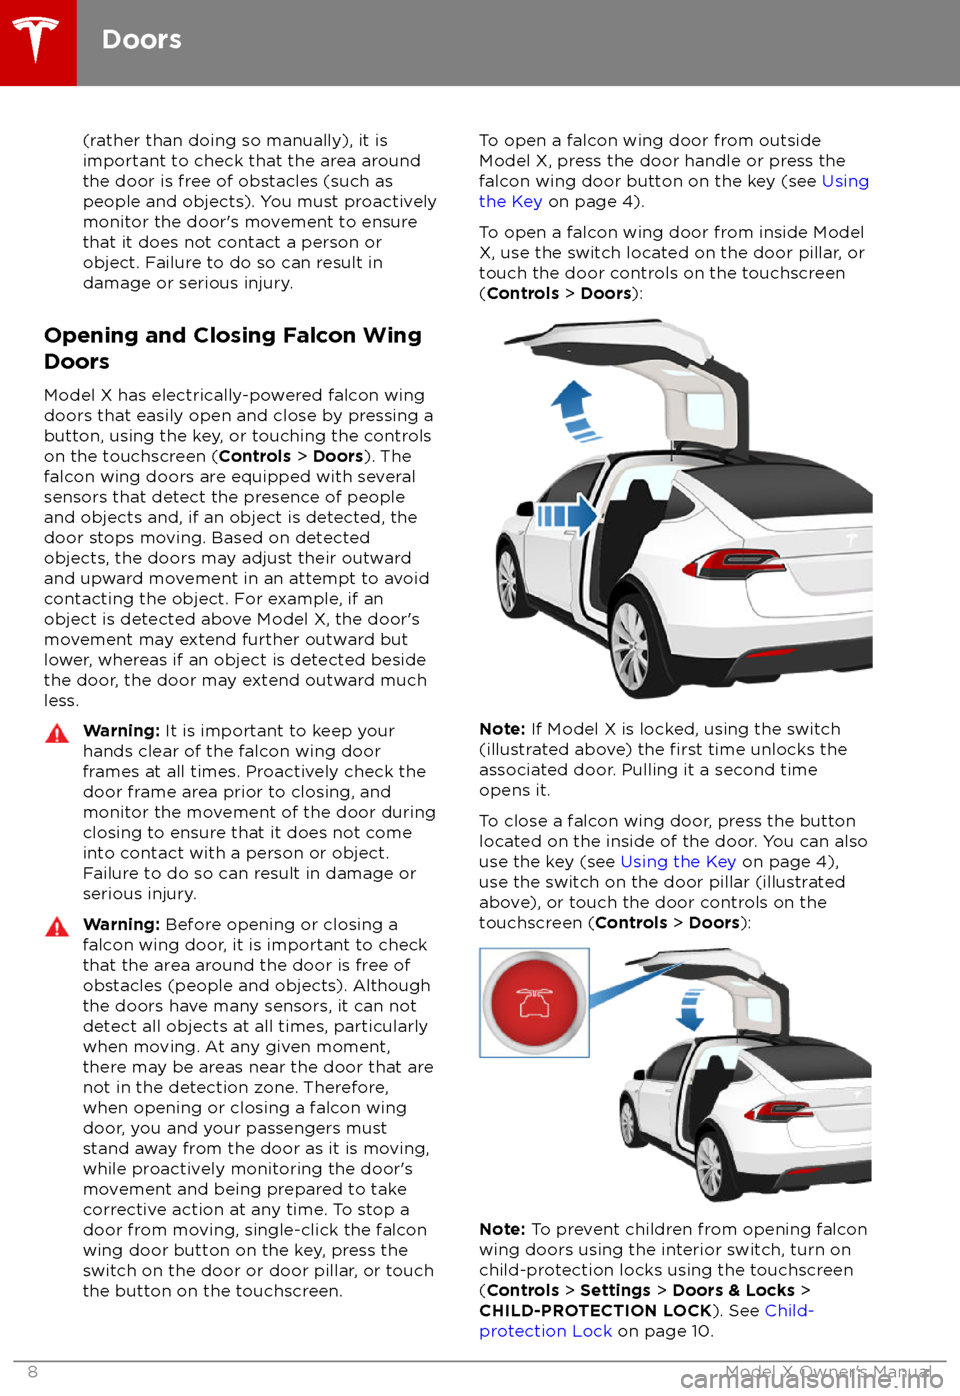 TESLA MODEL X 2018  Owners Manual  (rather than doing so manually), it is
important to check that the area around
the door is free of obstacles (such as
people and objects). You must proactively
monitor the door